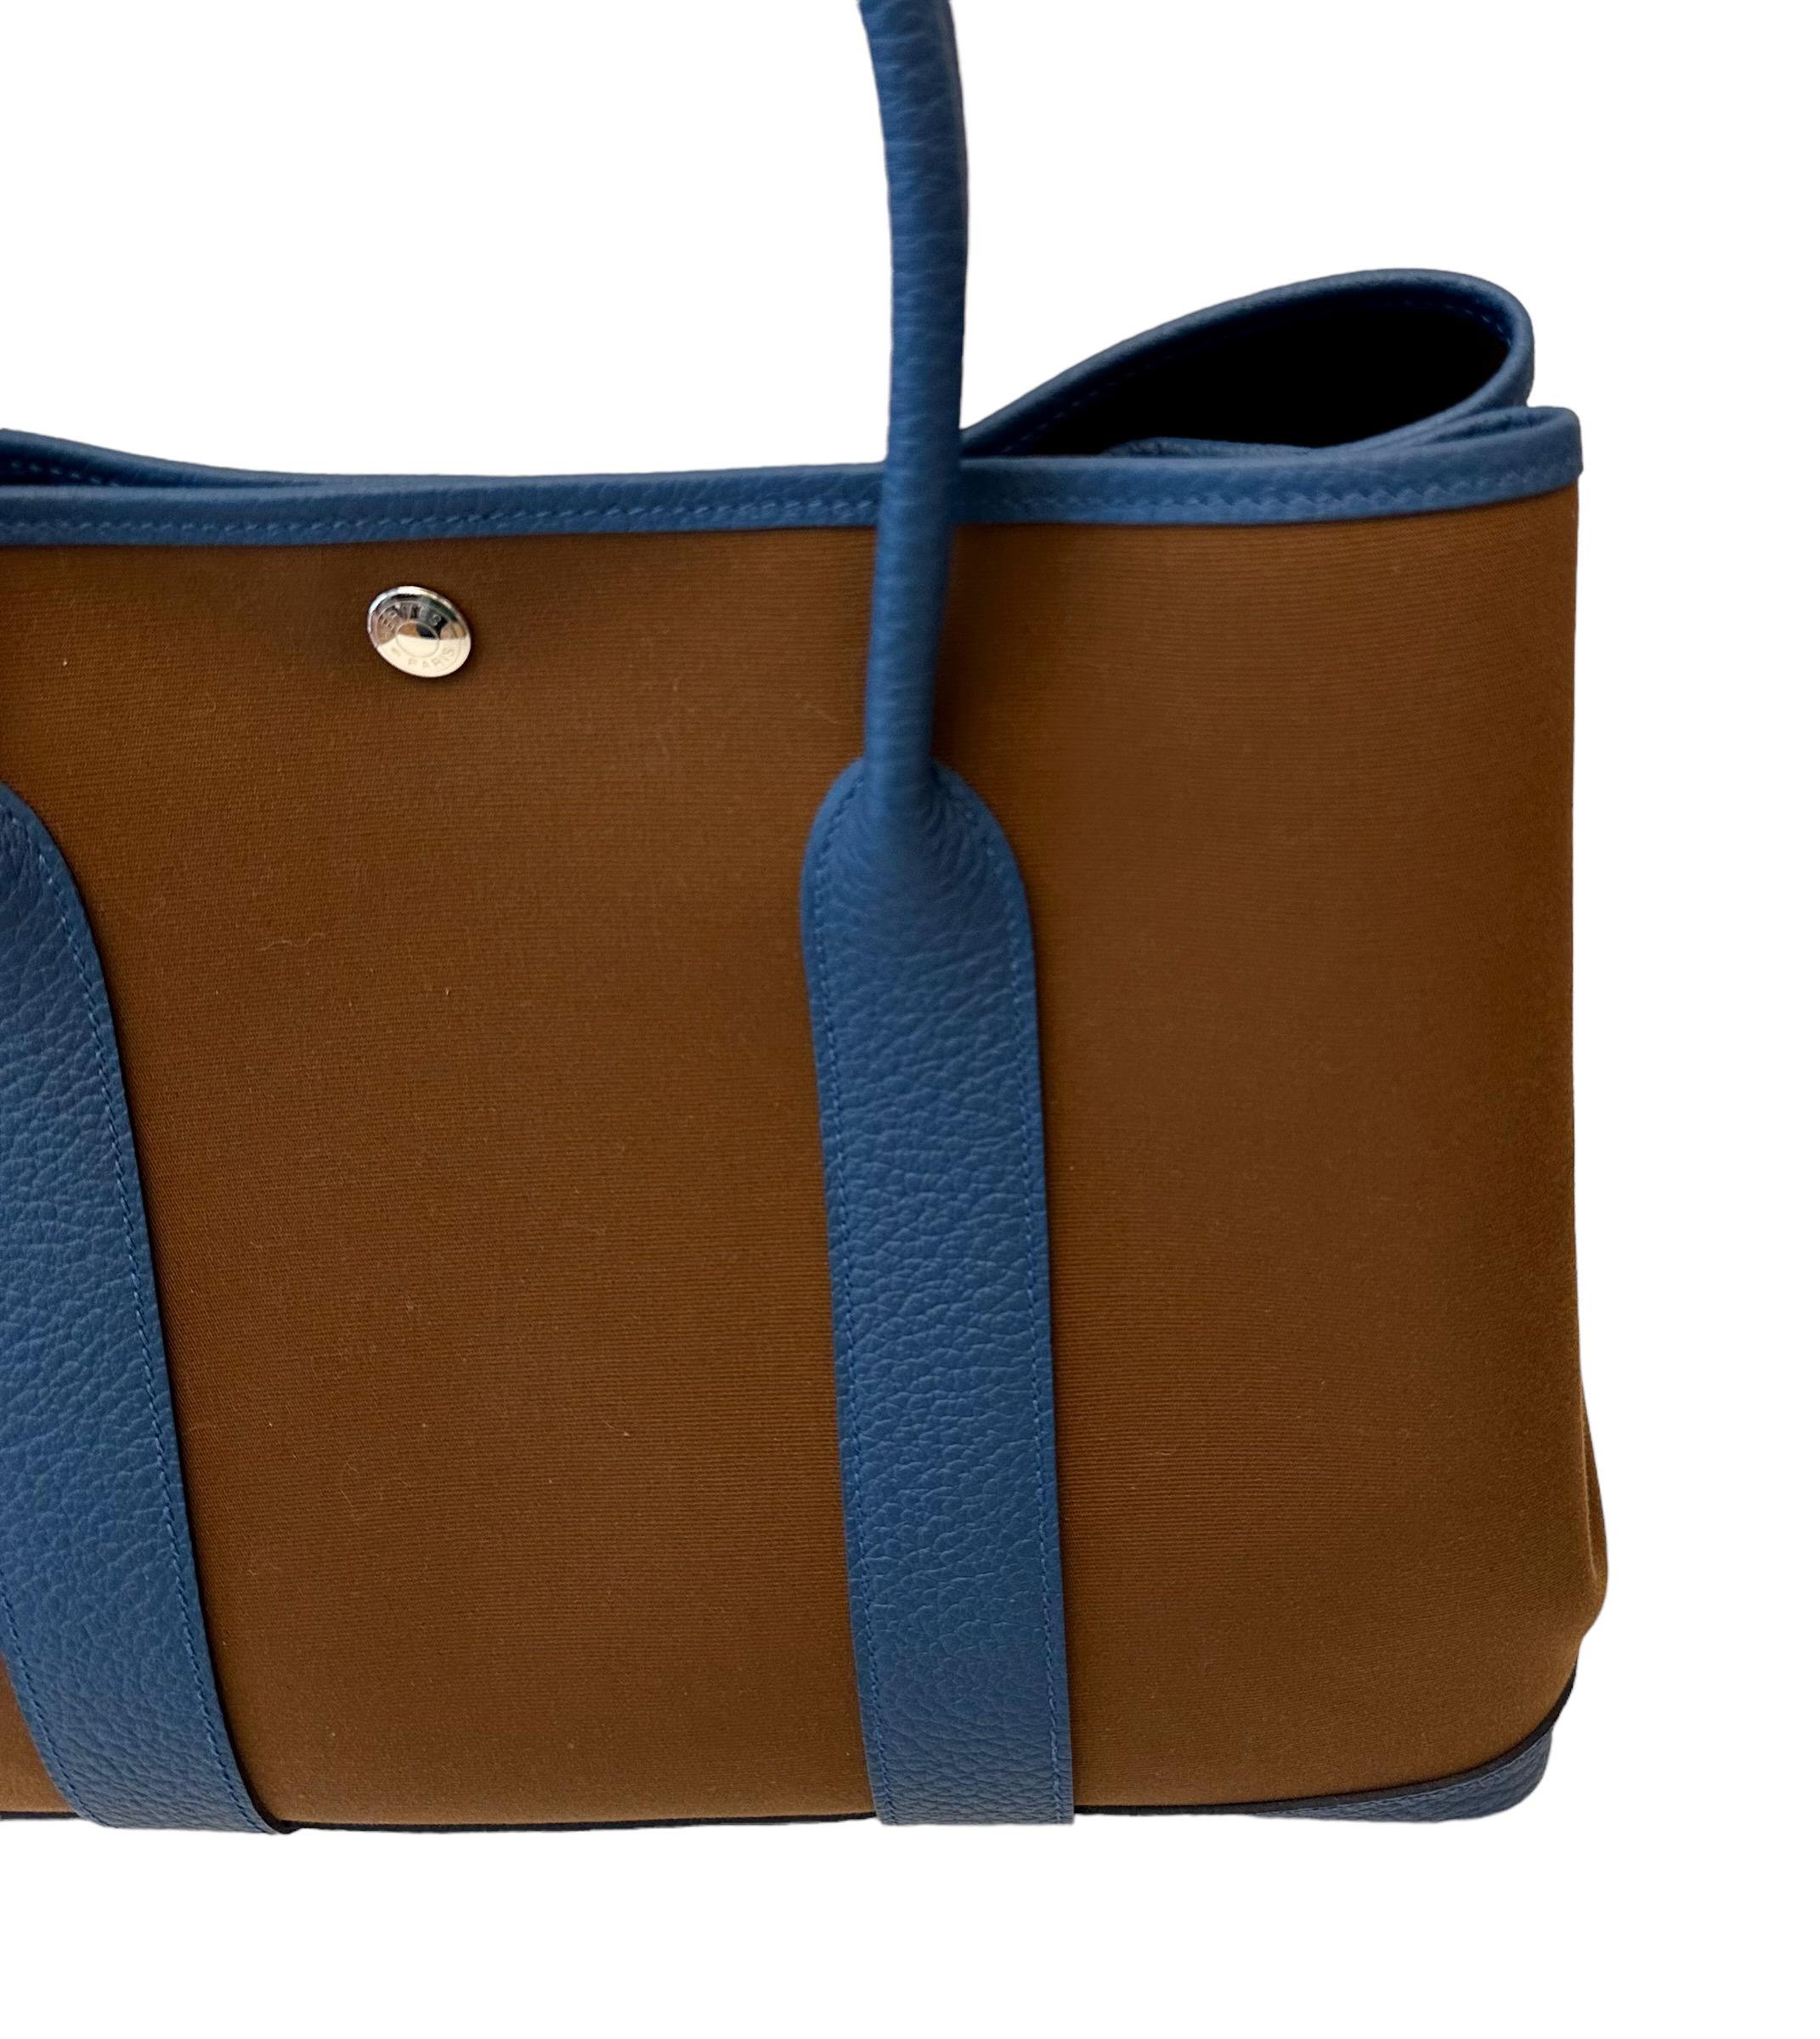 Iconic piece form the house of Hermès, this pre-owned Garden Party 36 is in pristine condition.
It is crafted in a beautiful coffee color canvas and blue Negonda leather for the leather parts.
It opens and adjusts with the 